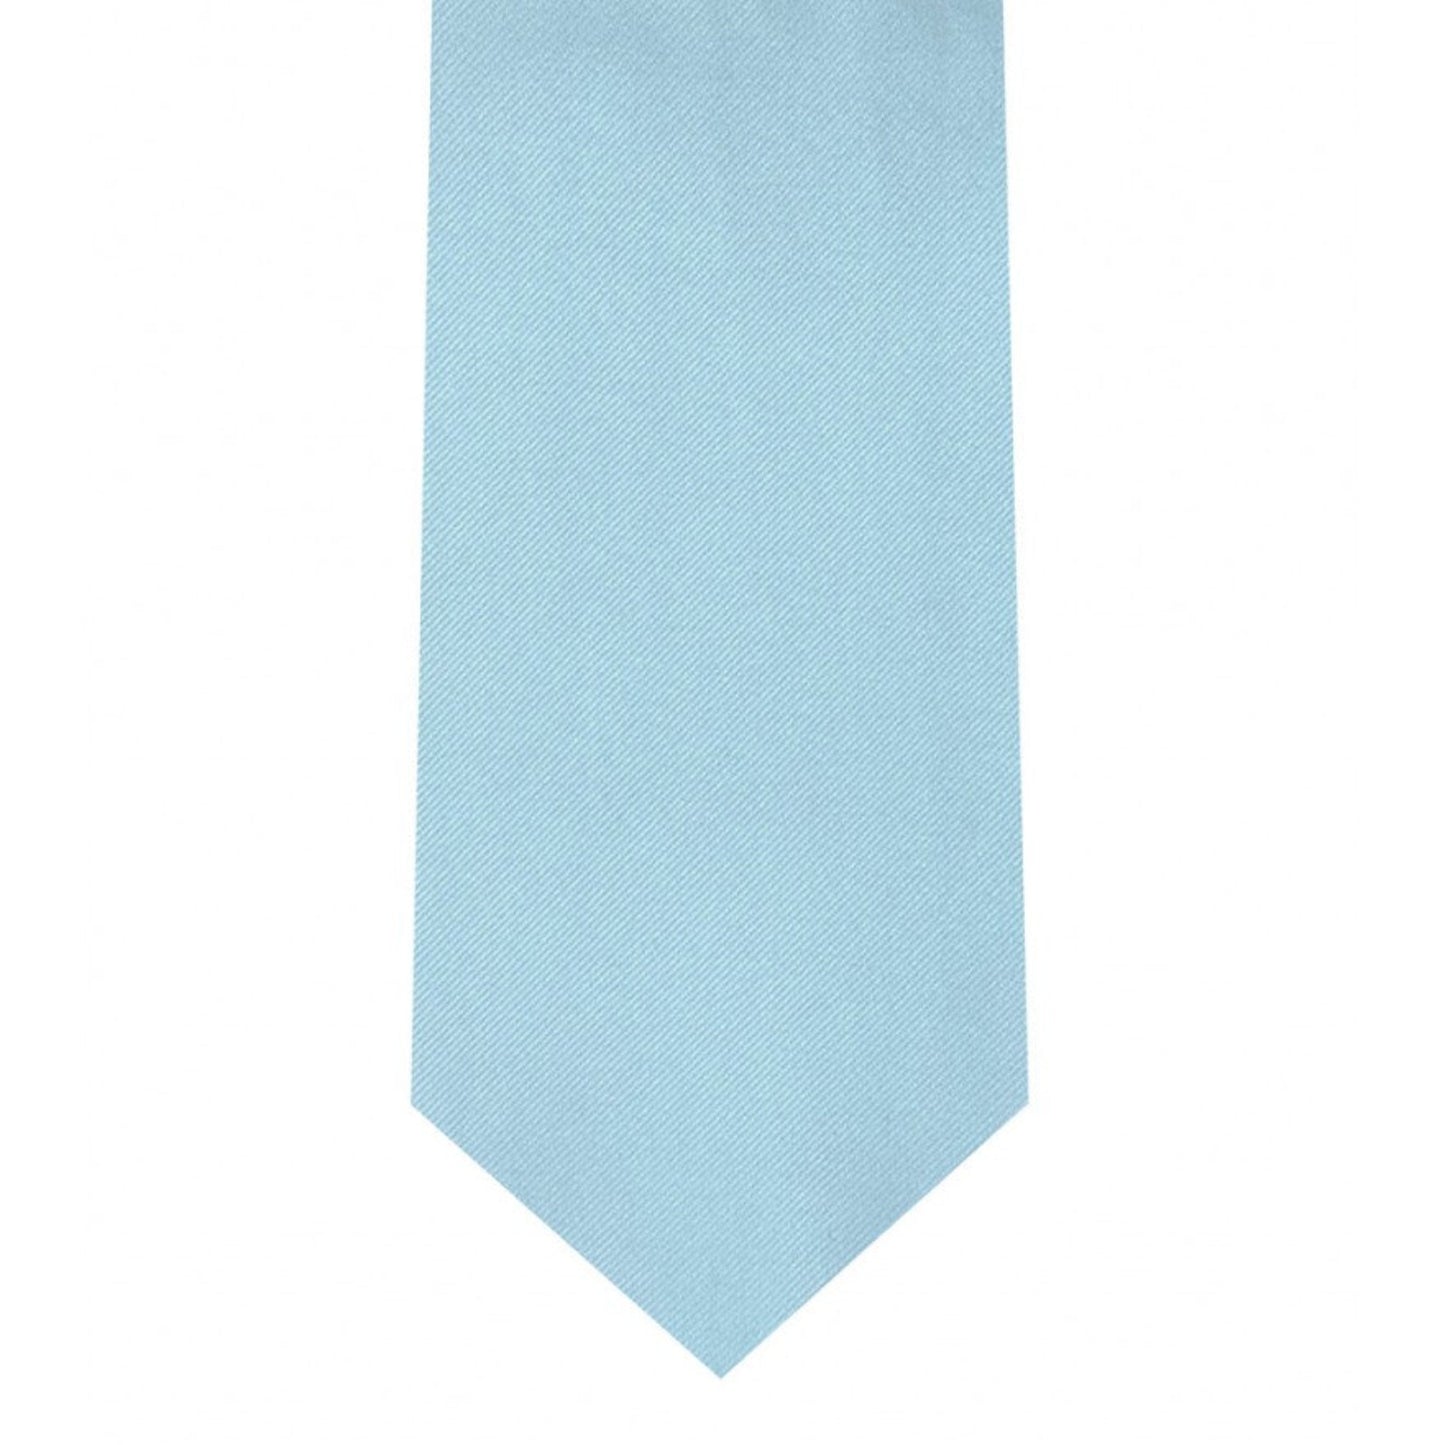 Classic Powder Blue Tie Skinny width 2.75 inches With Matching Pocket Square | KCT Menswear